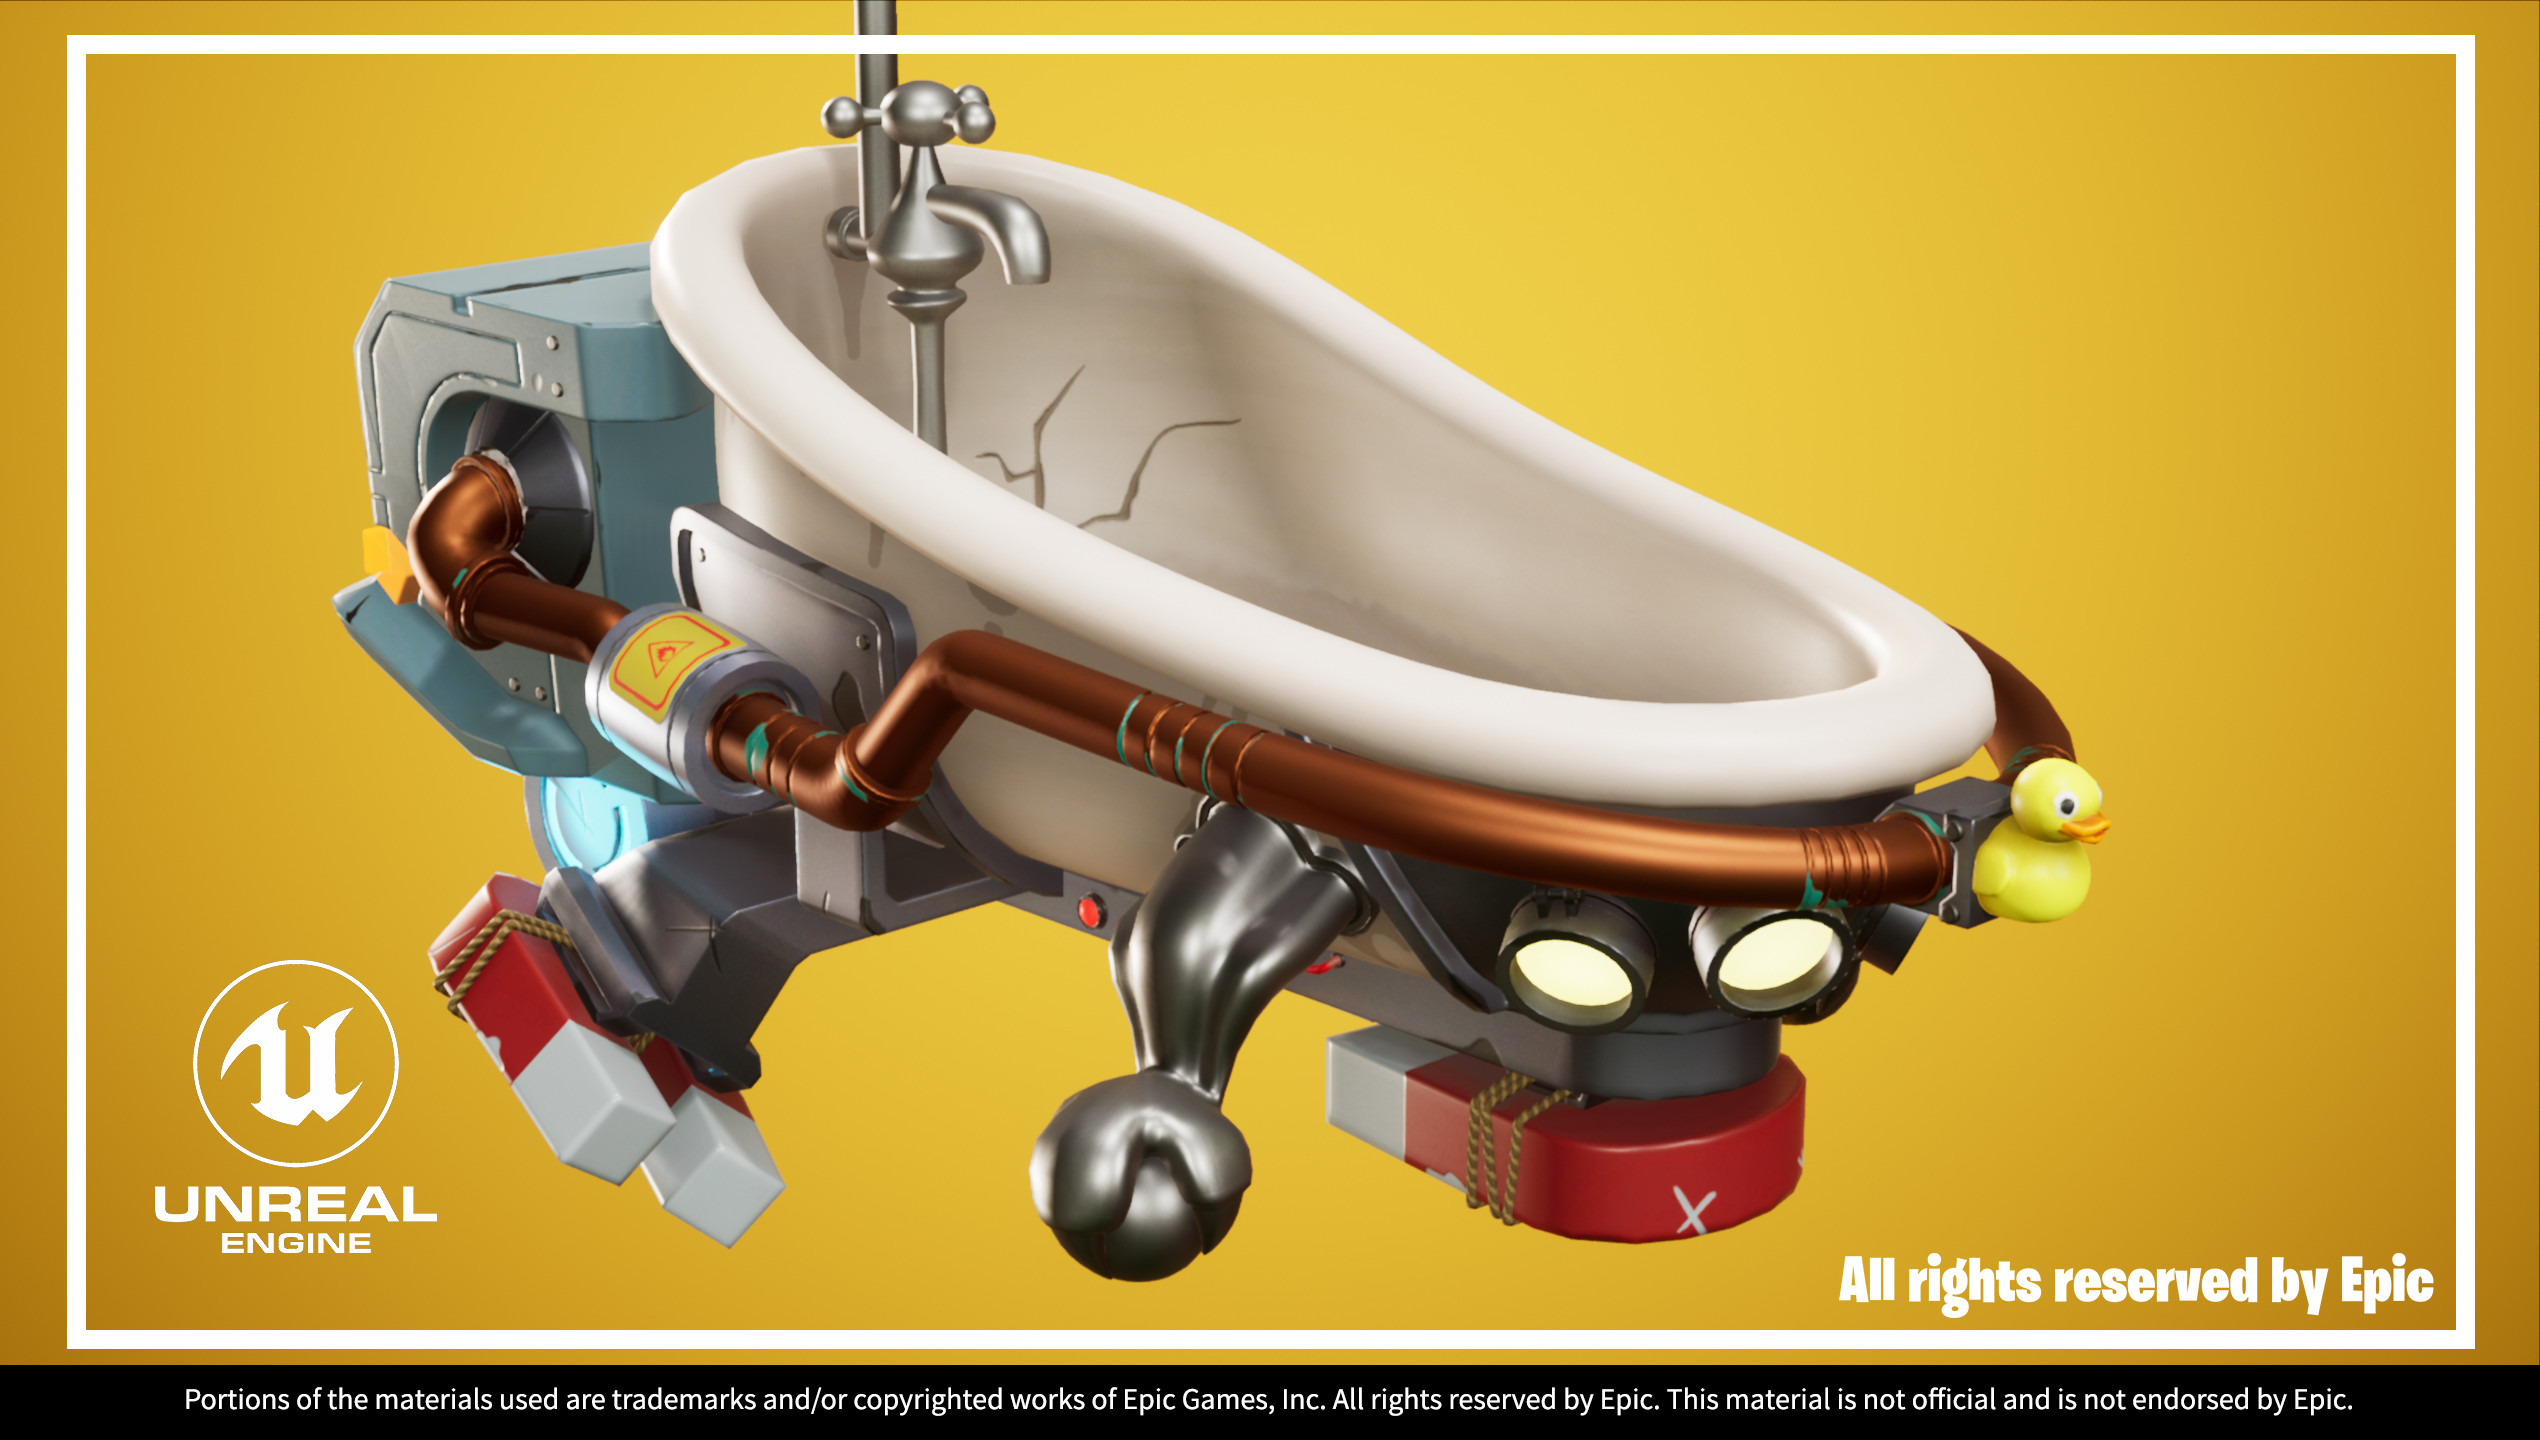 UE4 screenshot of Hover Bath Tub front right close up view.

